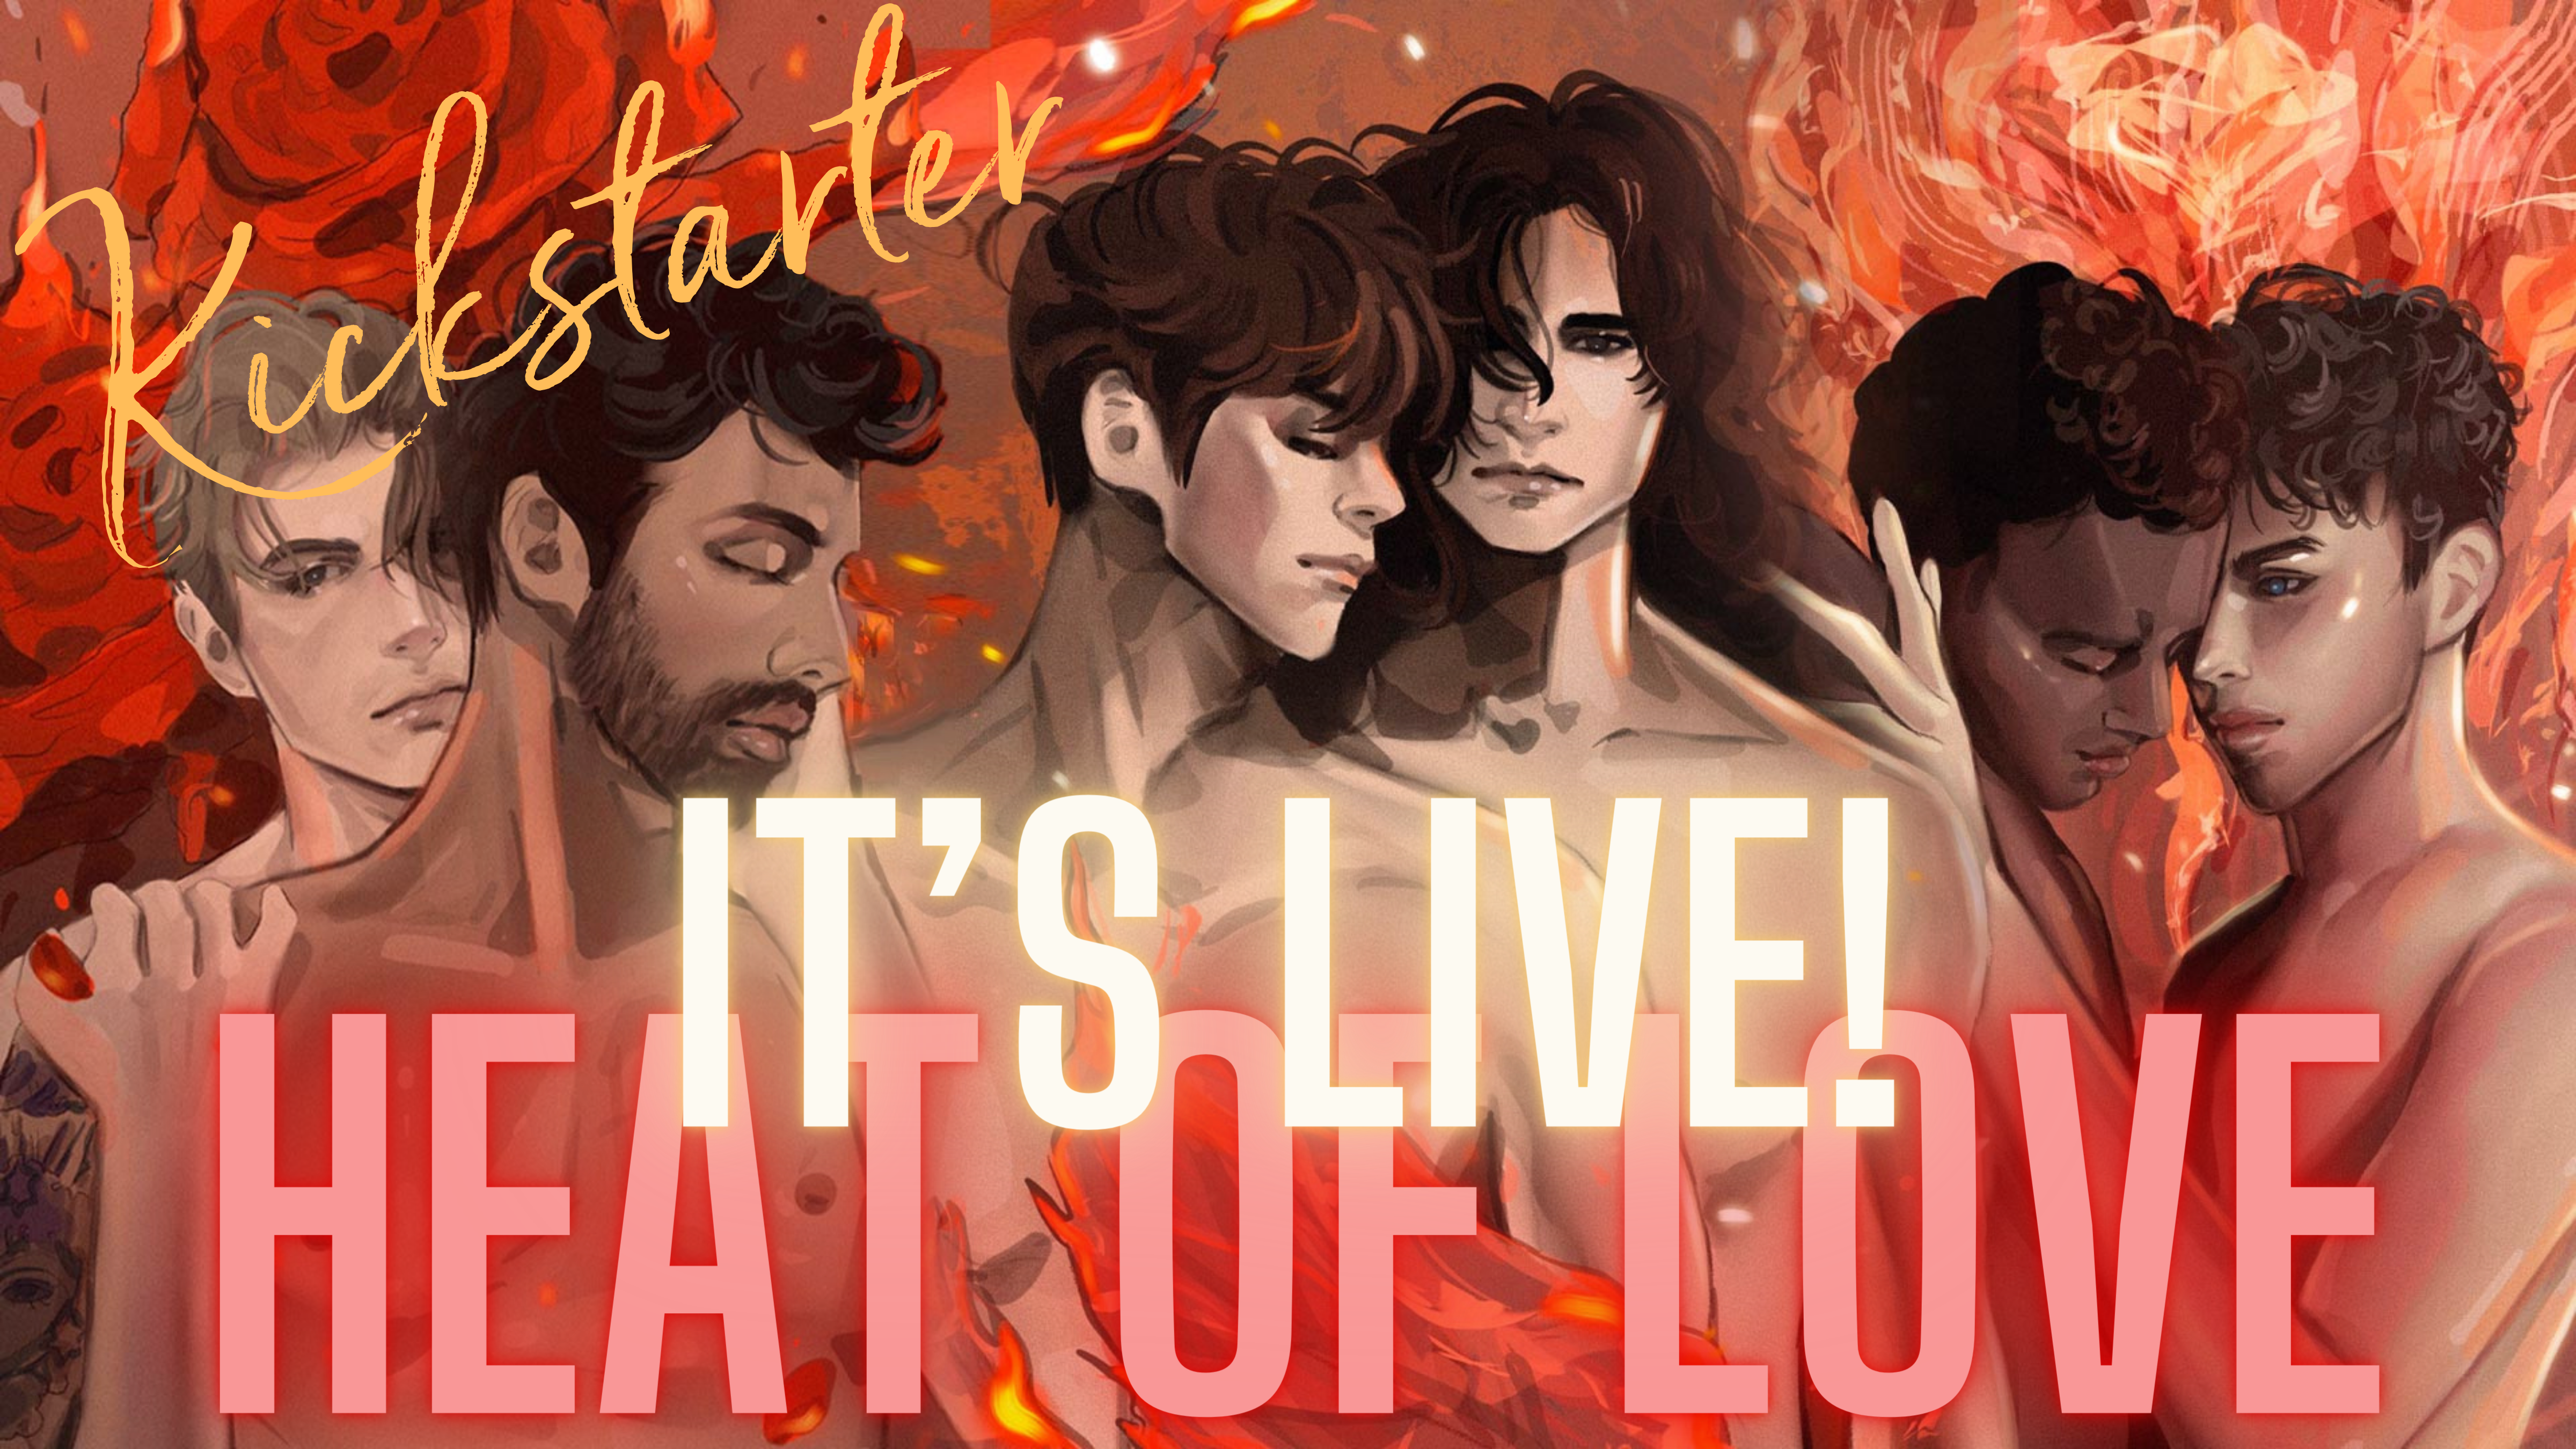 Photo is a combination of the LCheery cover art from the three main books in the Heat of Love series. It features three couples on an abstract, fiery background with the words "Kickstarter", "It's Live!", and "Heat of Love".